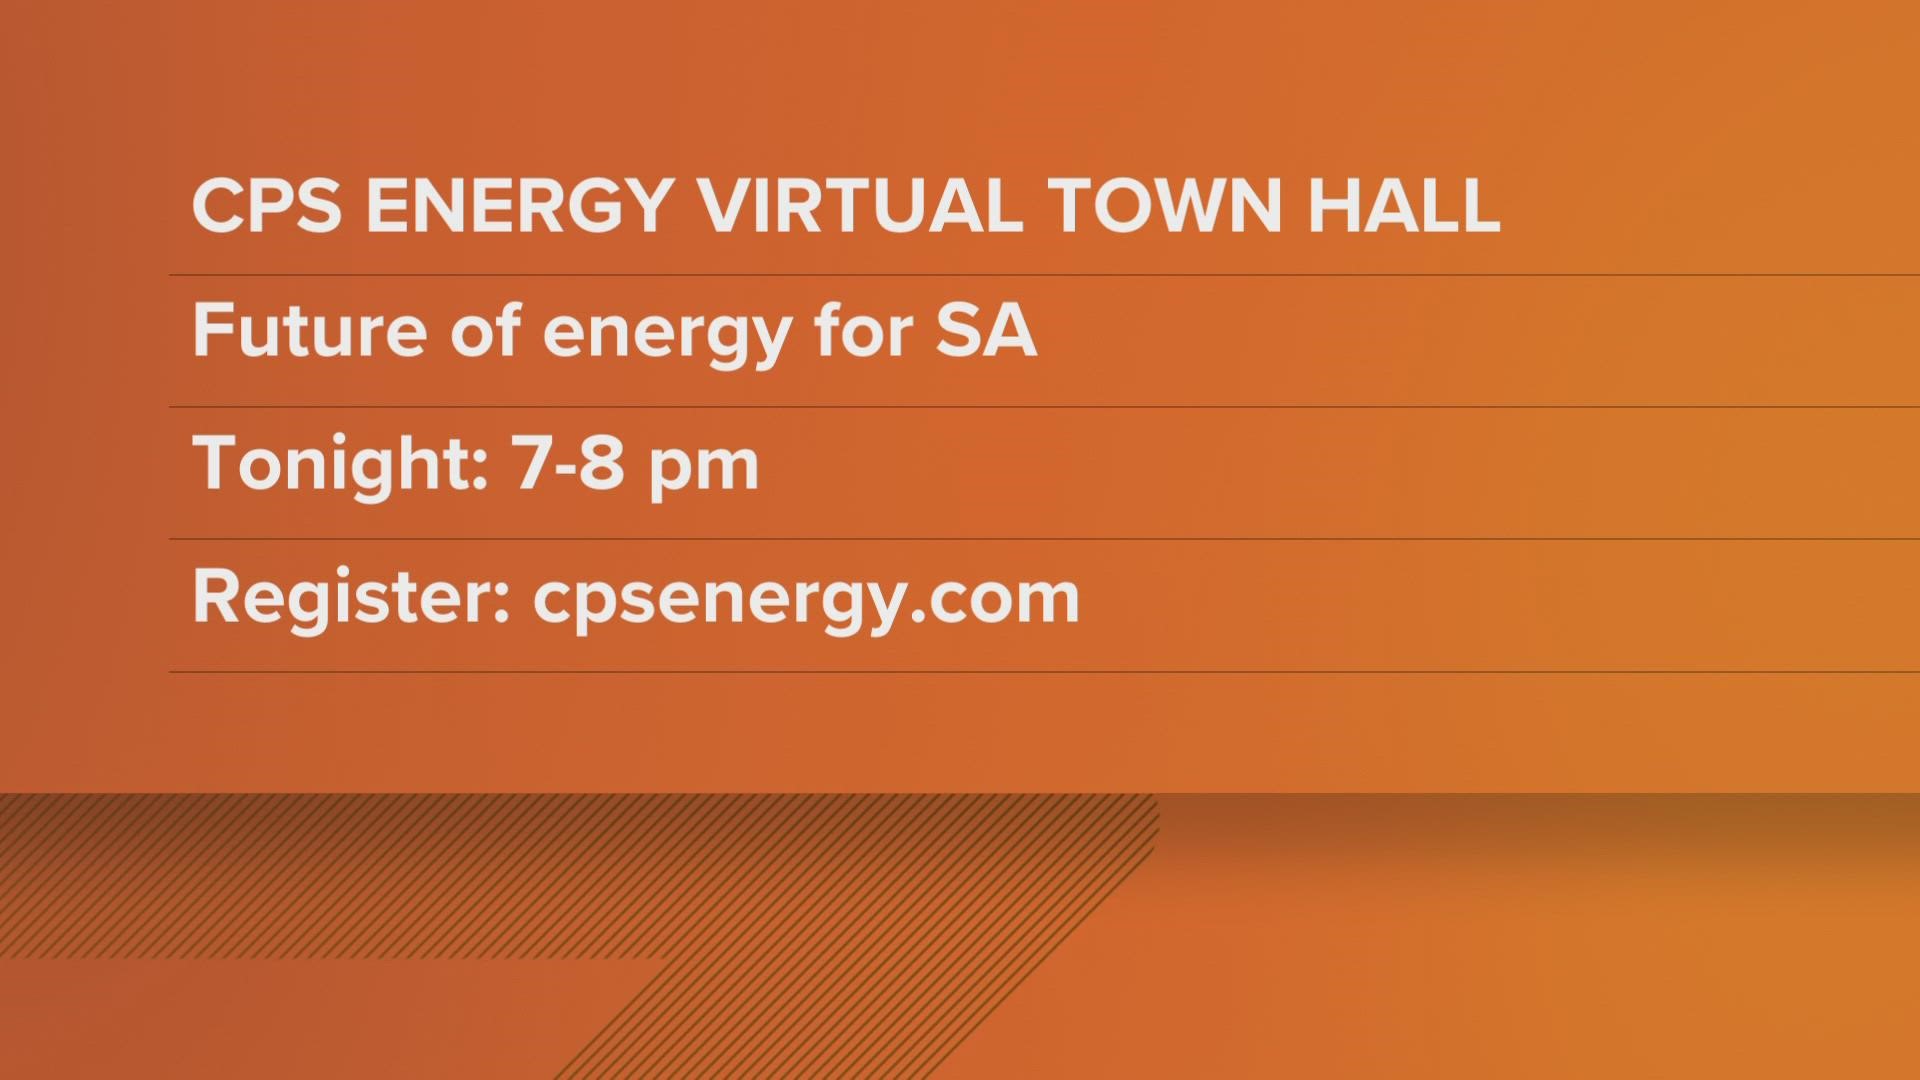 The electricity provider is holding a virtual town hall Thursday night starting at 7 p.m.